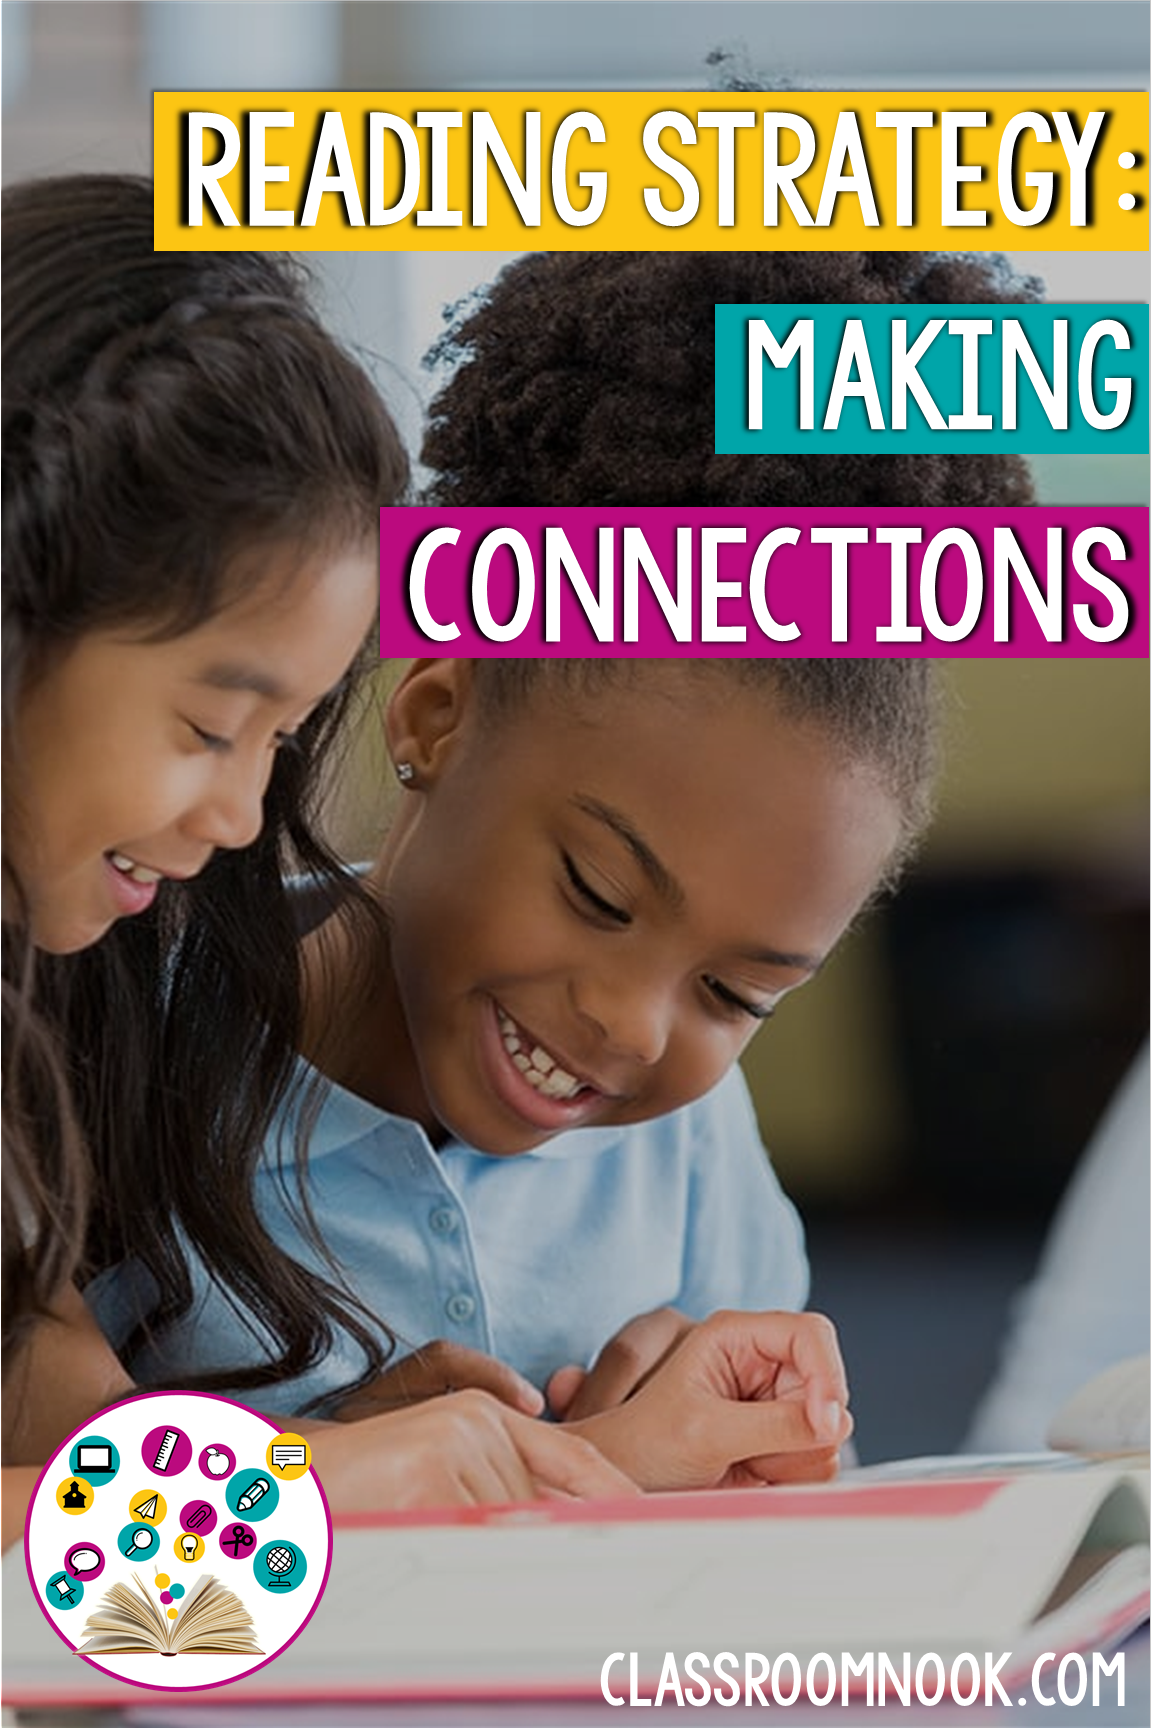 Making Connections (Copy)